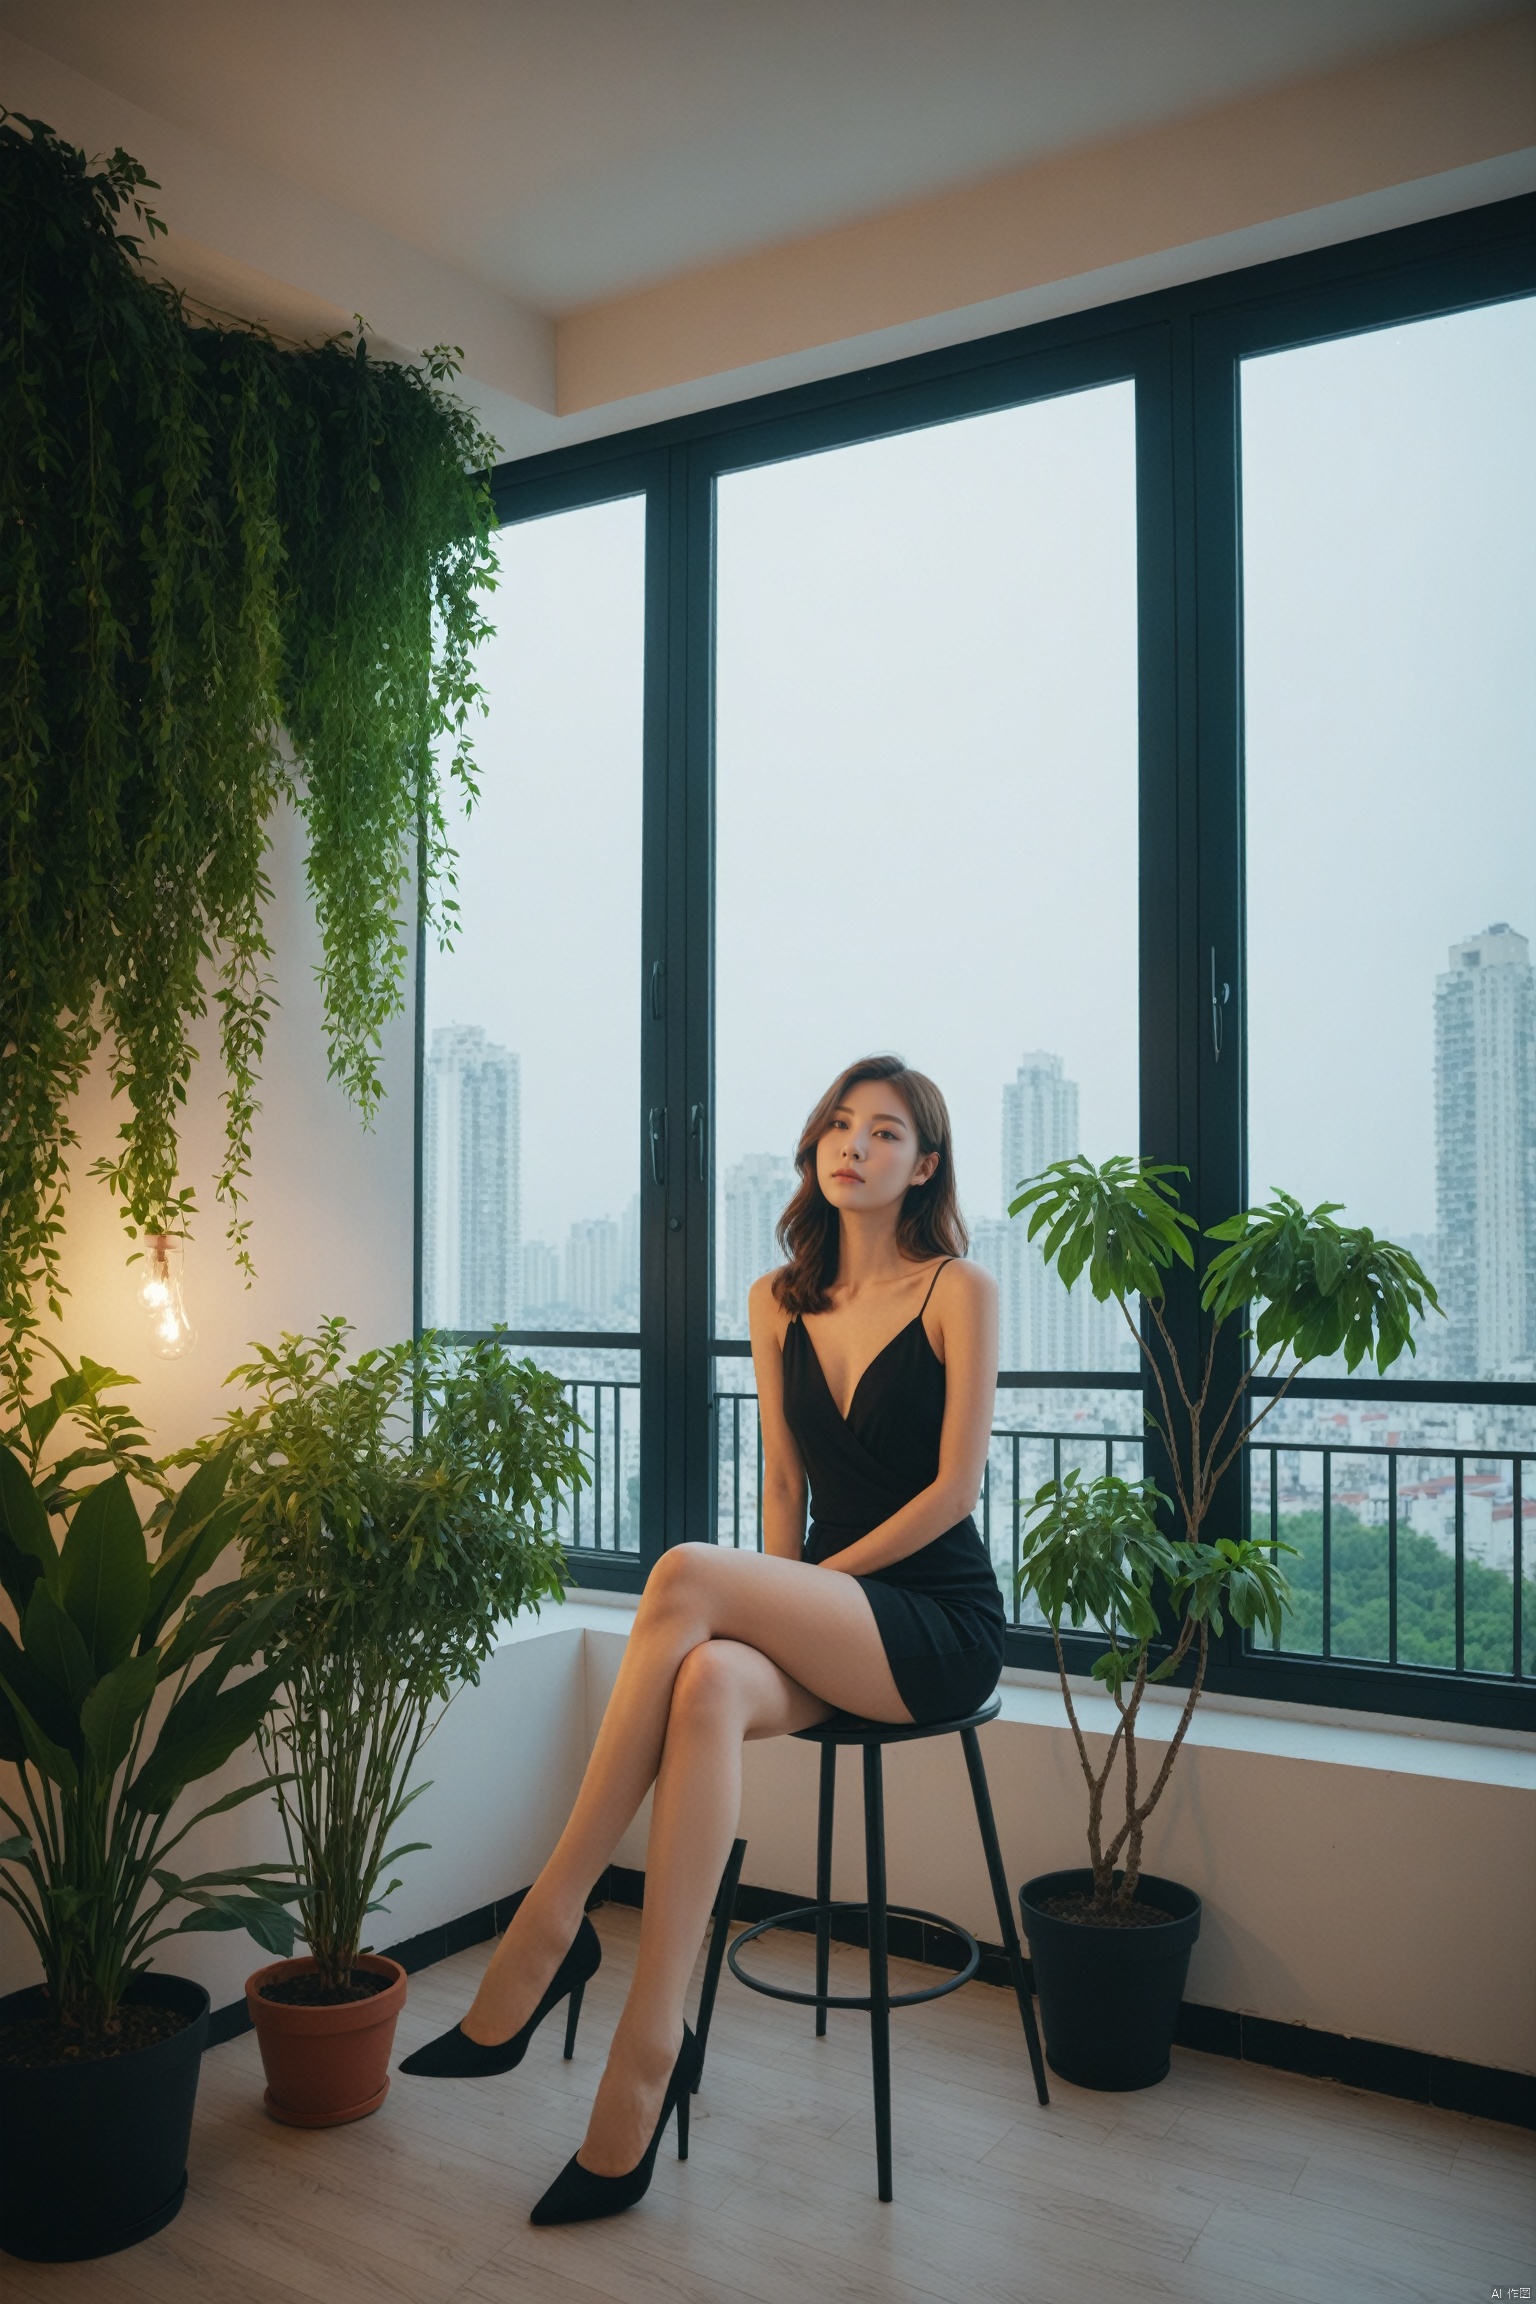  E-commerce photography scene pictures, chairs, glass windows,city night,balconies, dimlight, green plants, warm furniture decorations, high-definition photography,an sheer torn pantyhose girl,